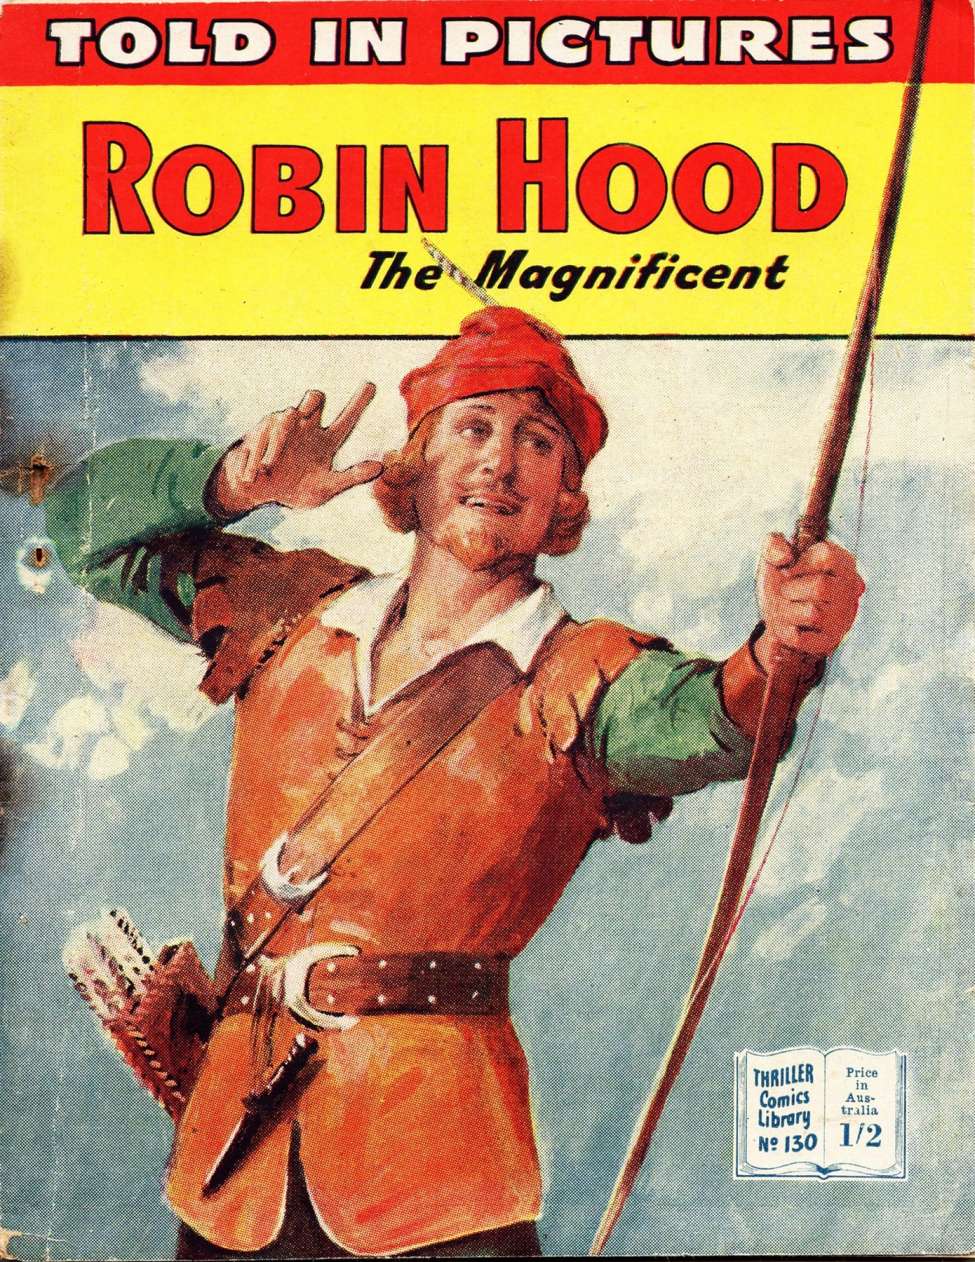 Book Cover For Thriller Comics Library 130 - Robin Hood the Magnificent